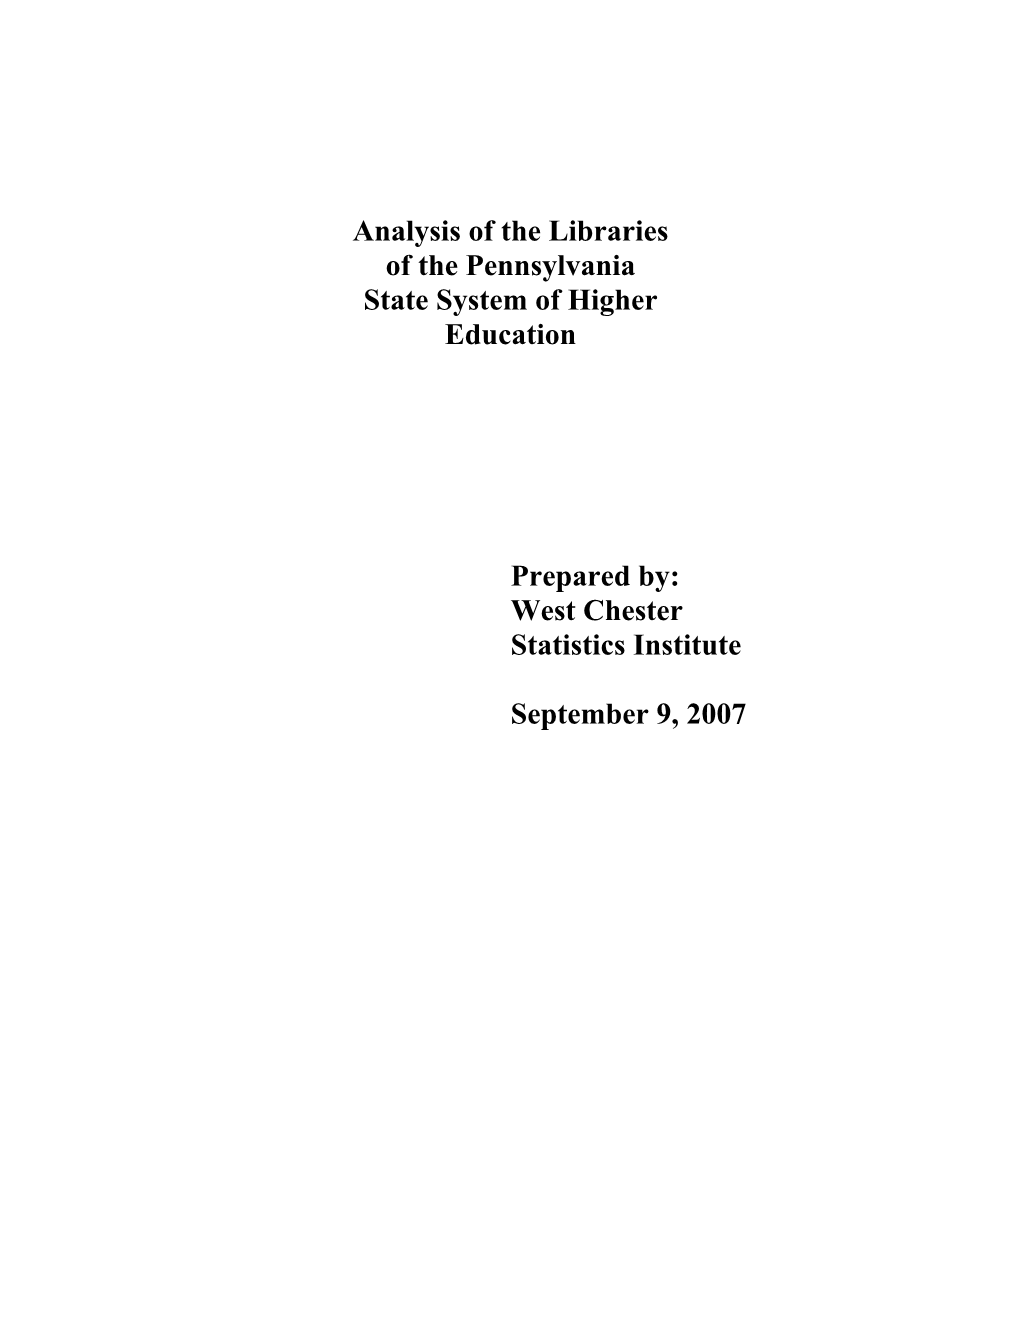 Analysis of the Libraries of the Pennsylvania State System of Higher Education